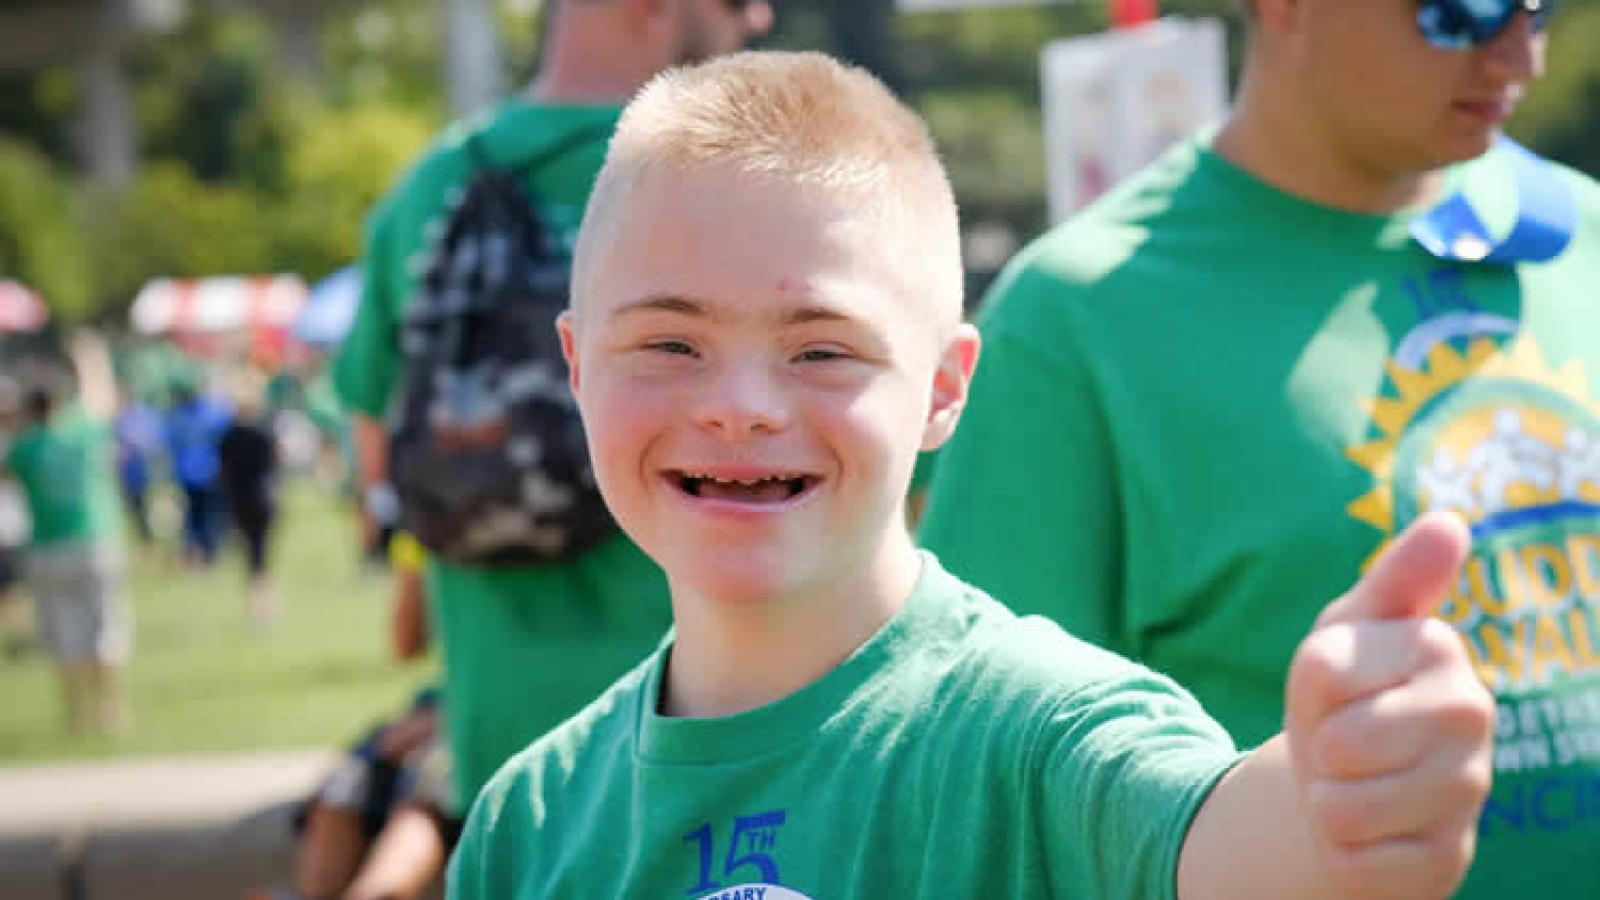 History of Buddy Walk National Down Syndrome Society (NDSS)